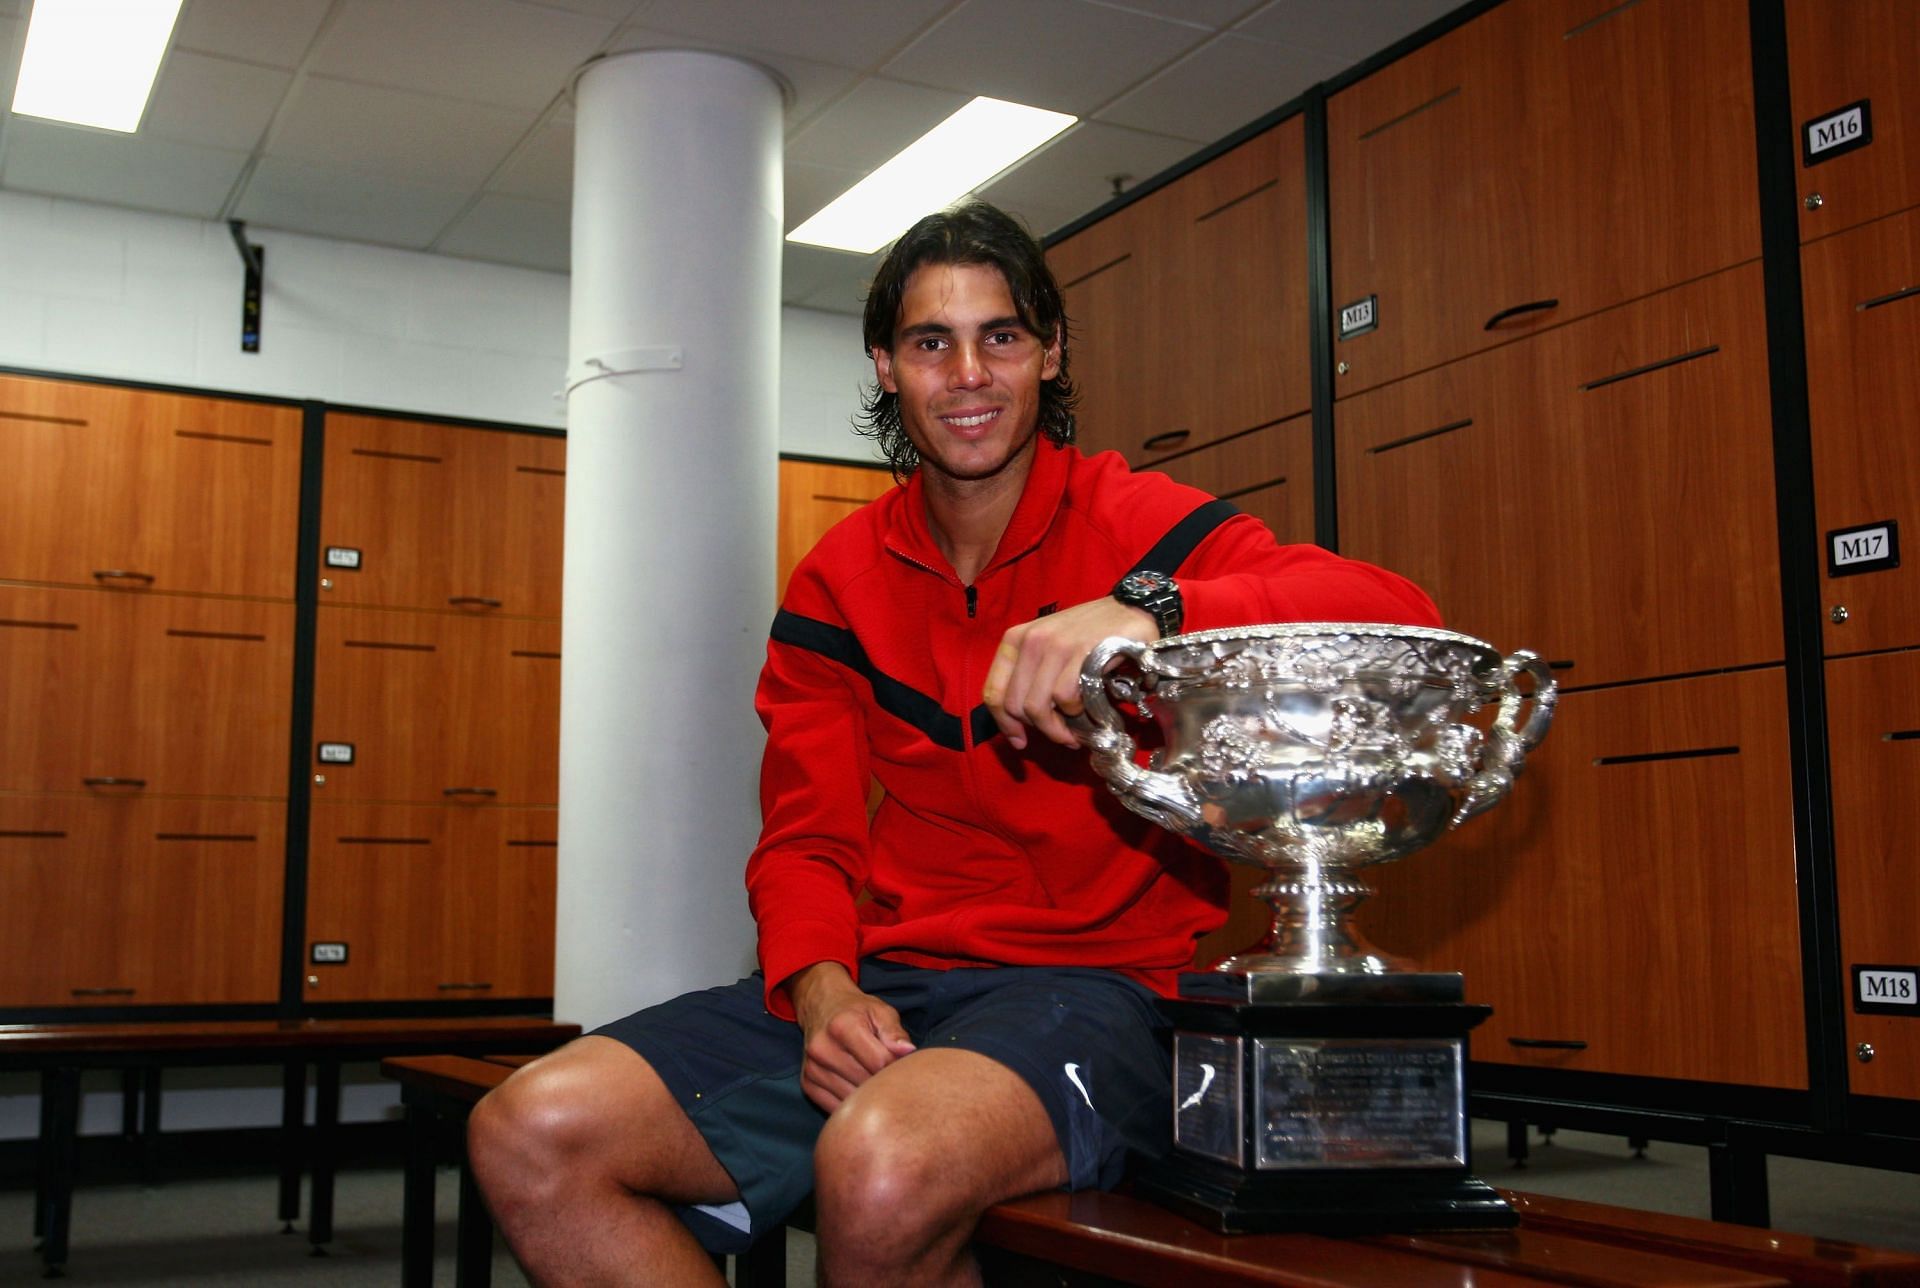 Of his 20 Grand Slam titles, only one was won at the Australian Open.